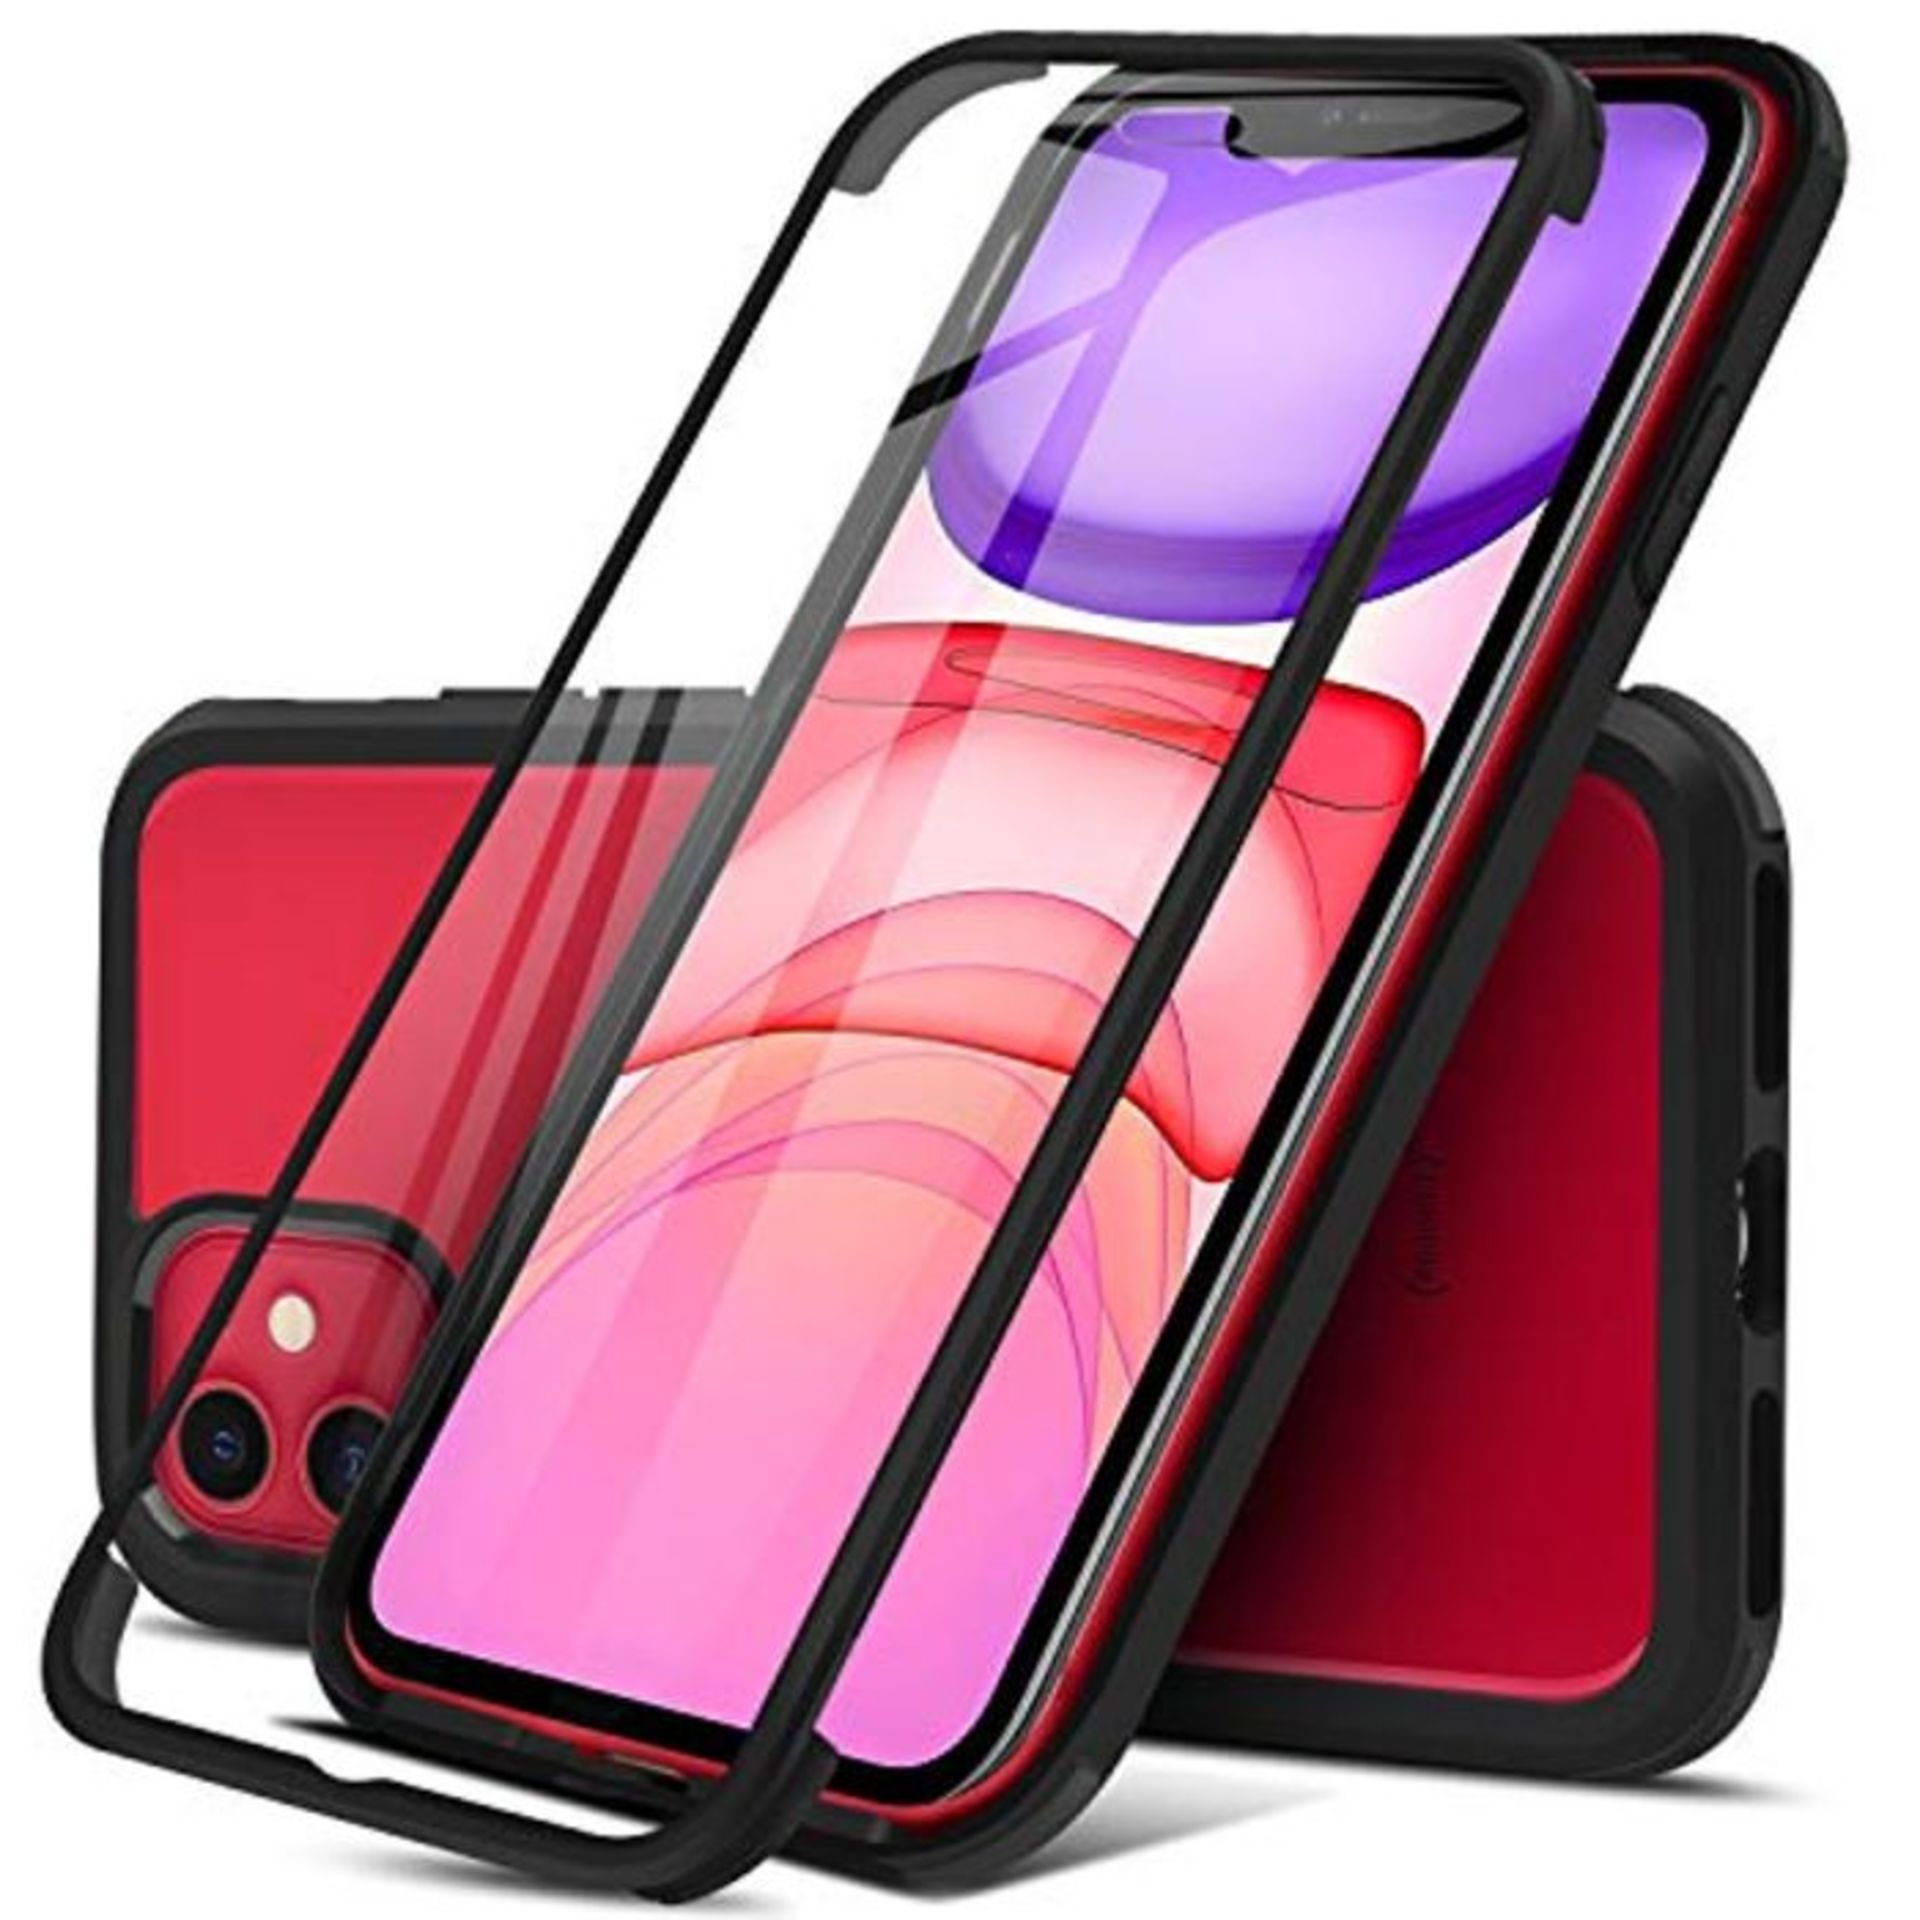 DOSNTO Designed for iPhone 11 Case Full Body Heavy Duty [Military Grade] Shockproof Dr